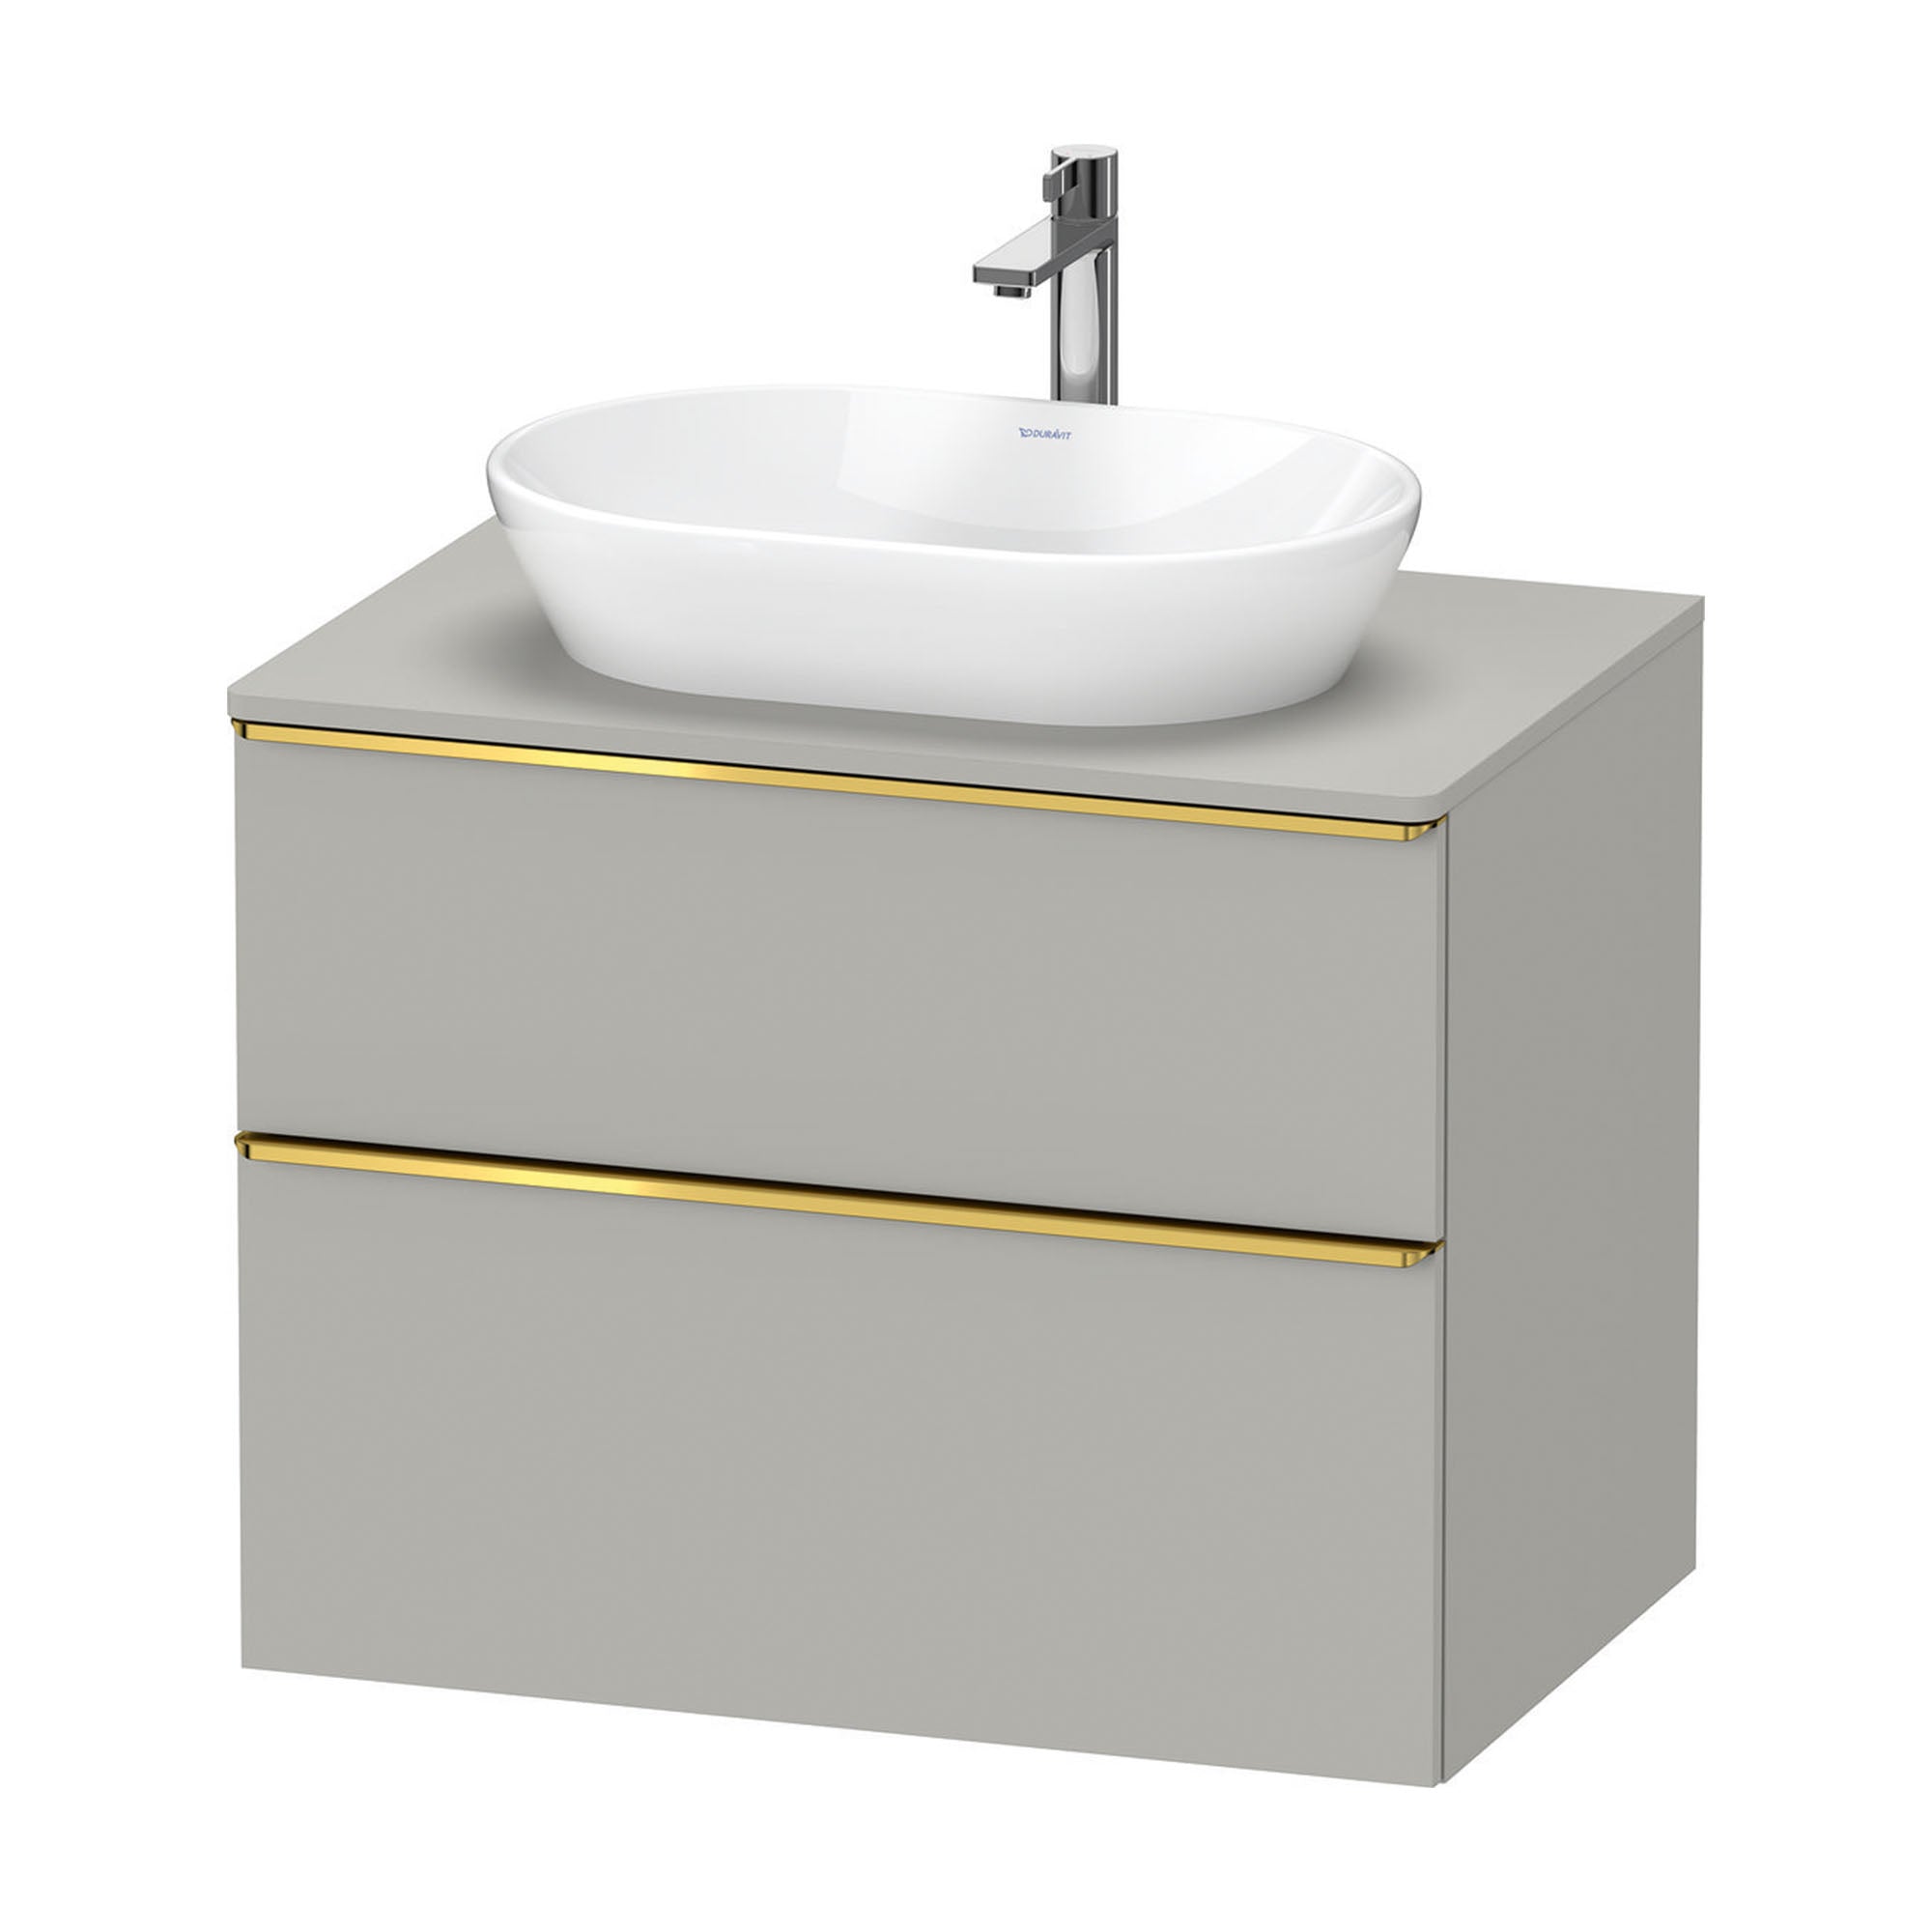 duravit d-neo 800 wall mounted vanity unit with worktop concrete grey gold handles